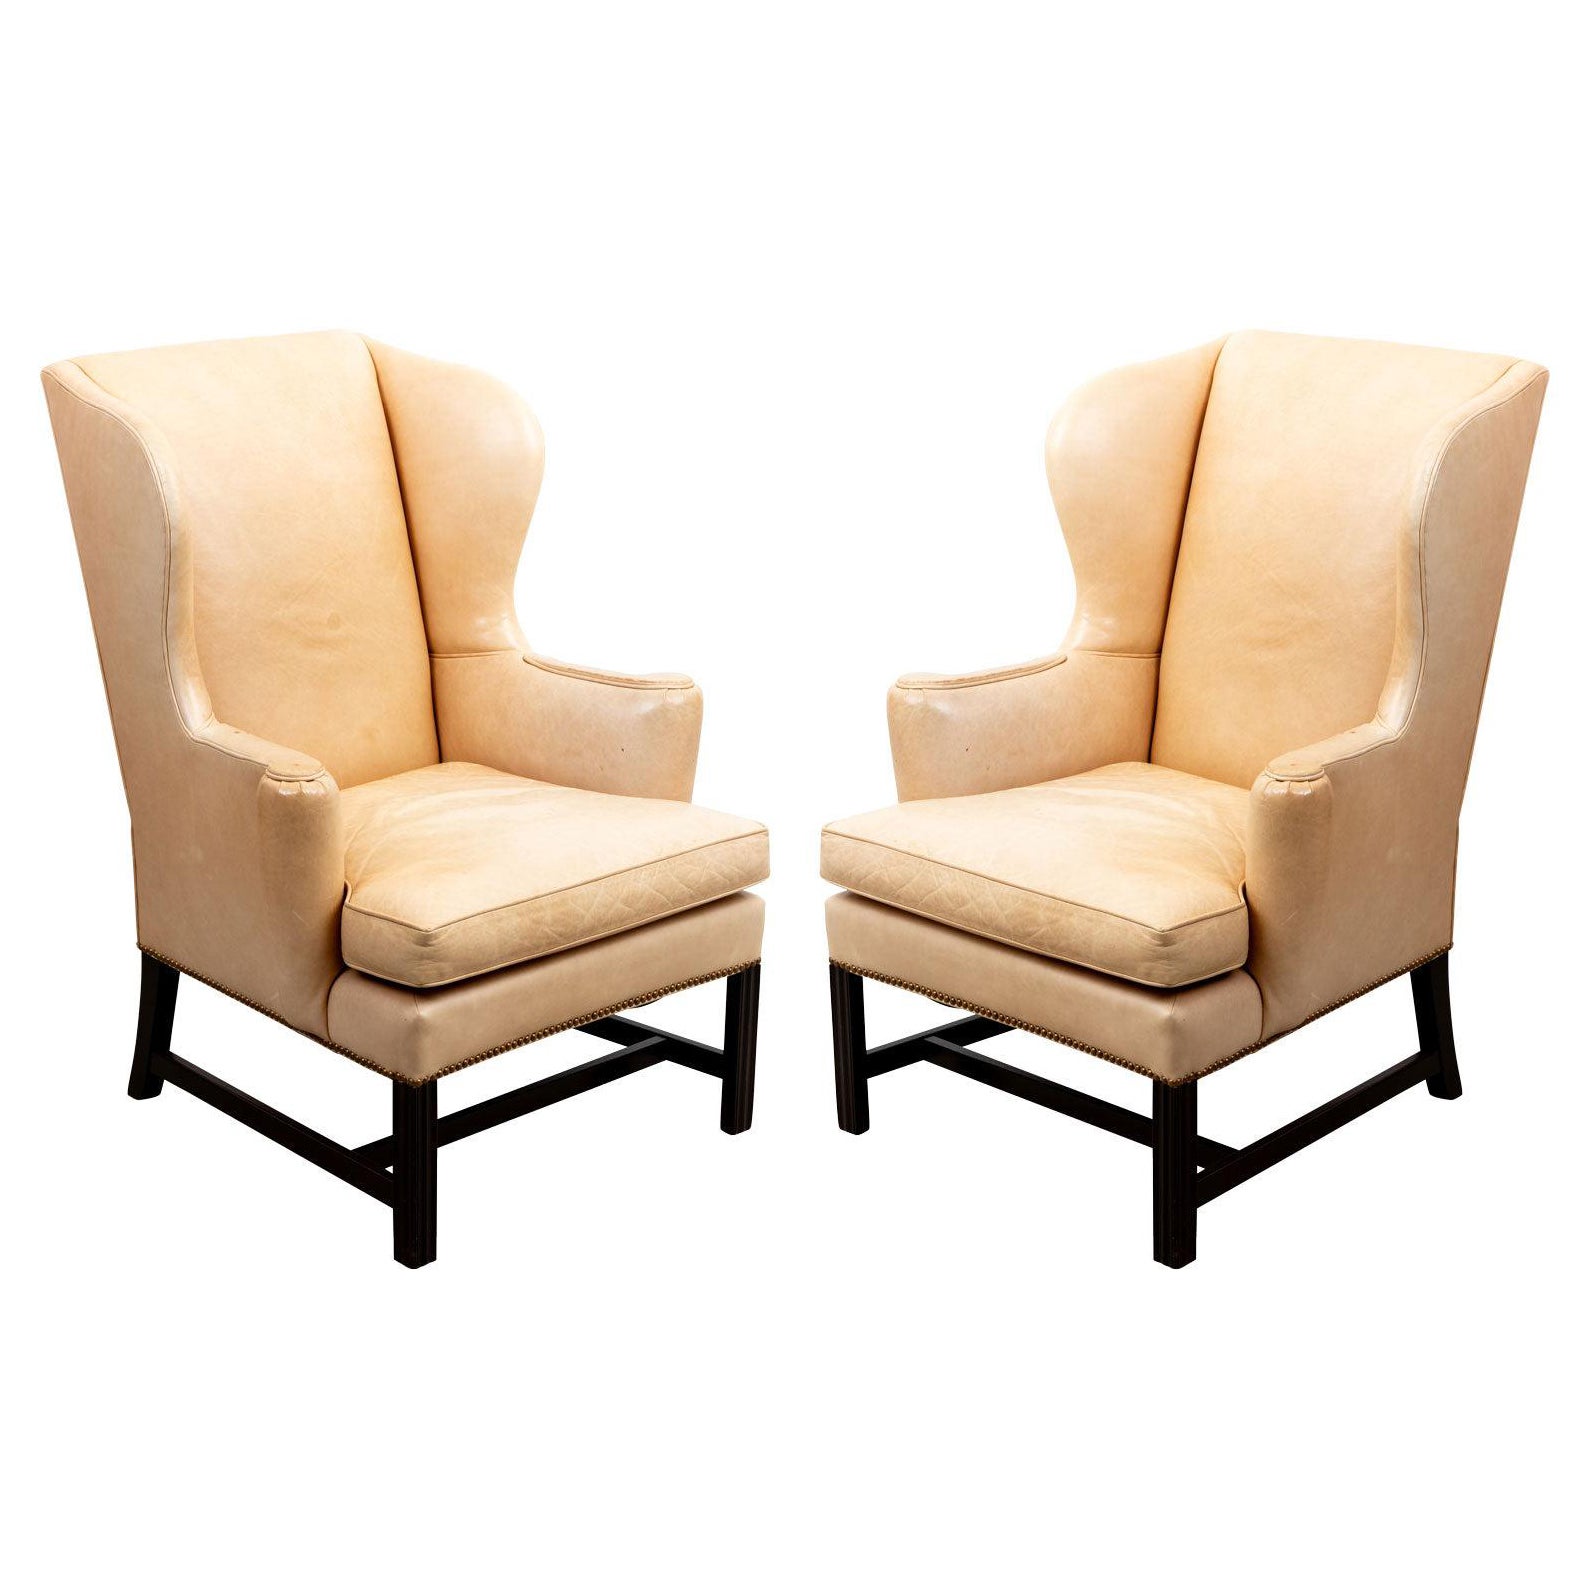 Pair of Cowtan and Tout Camel Leather Wing Chairs